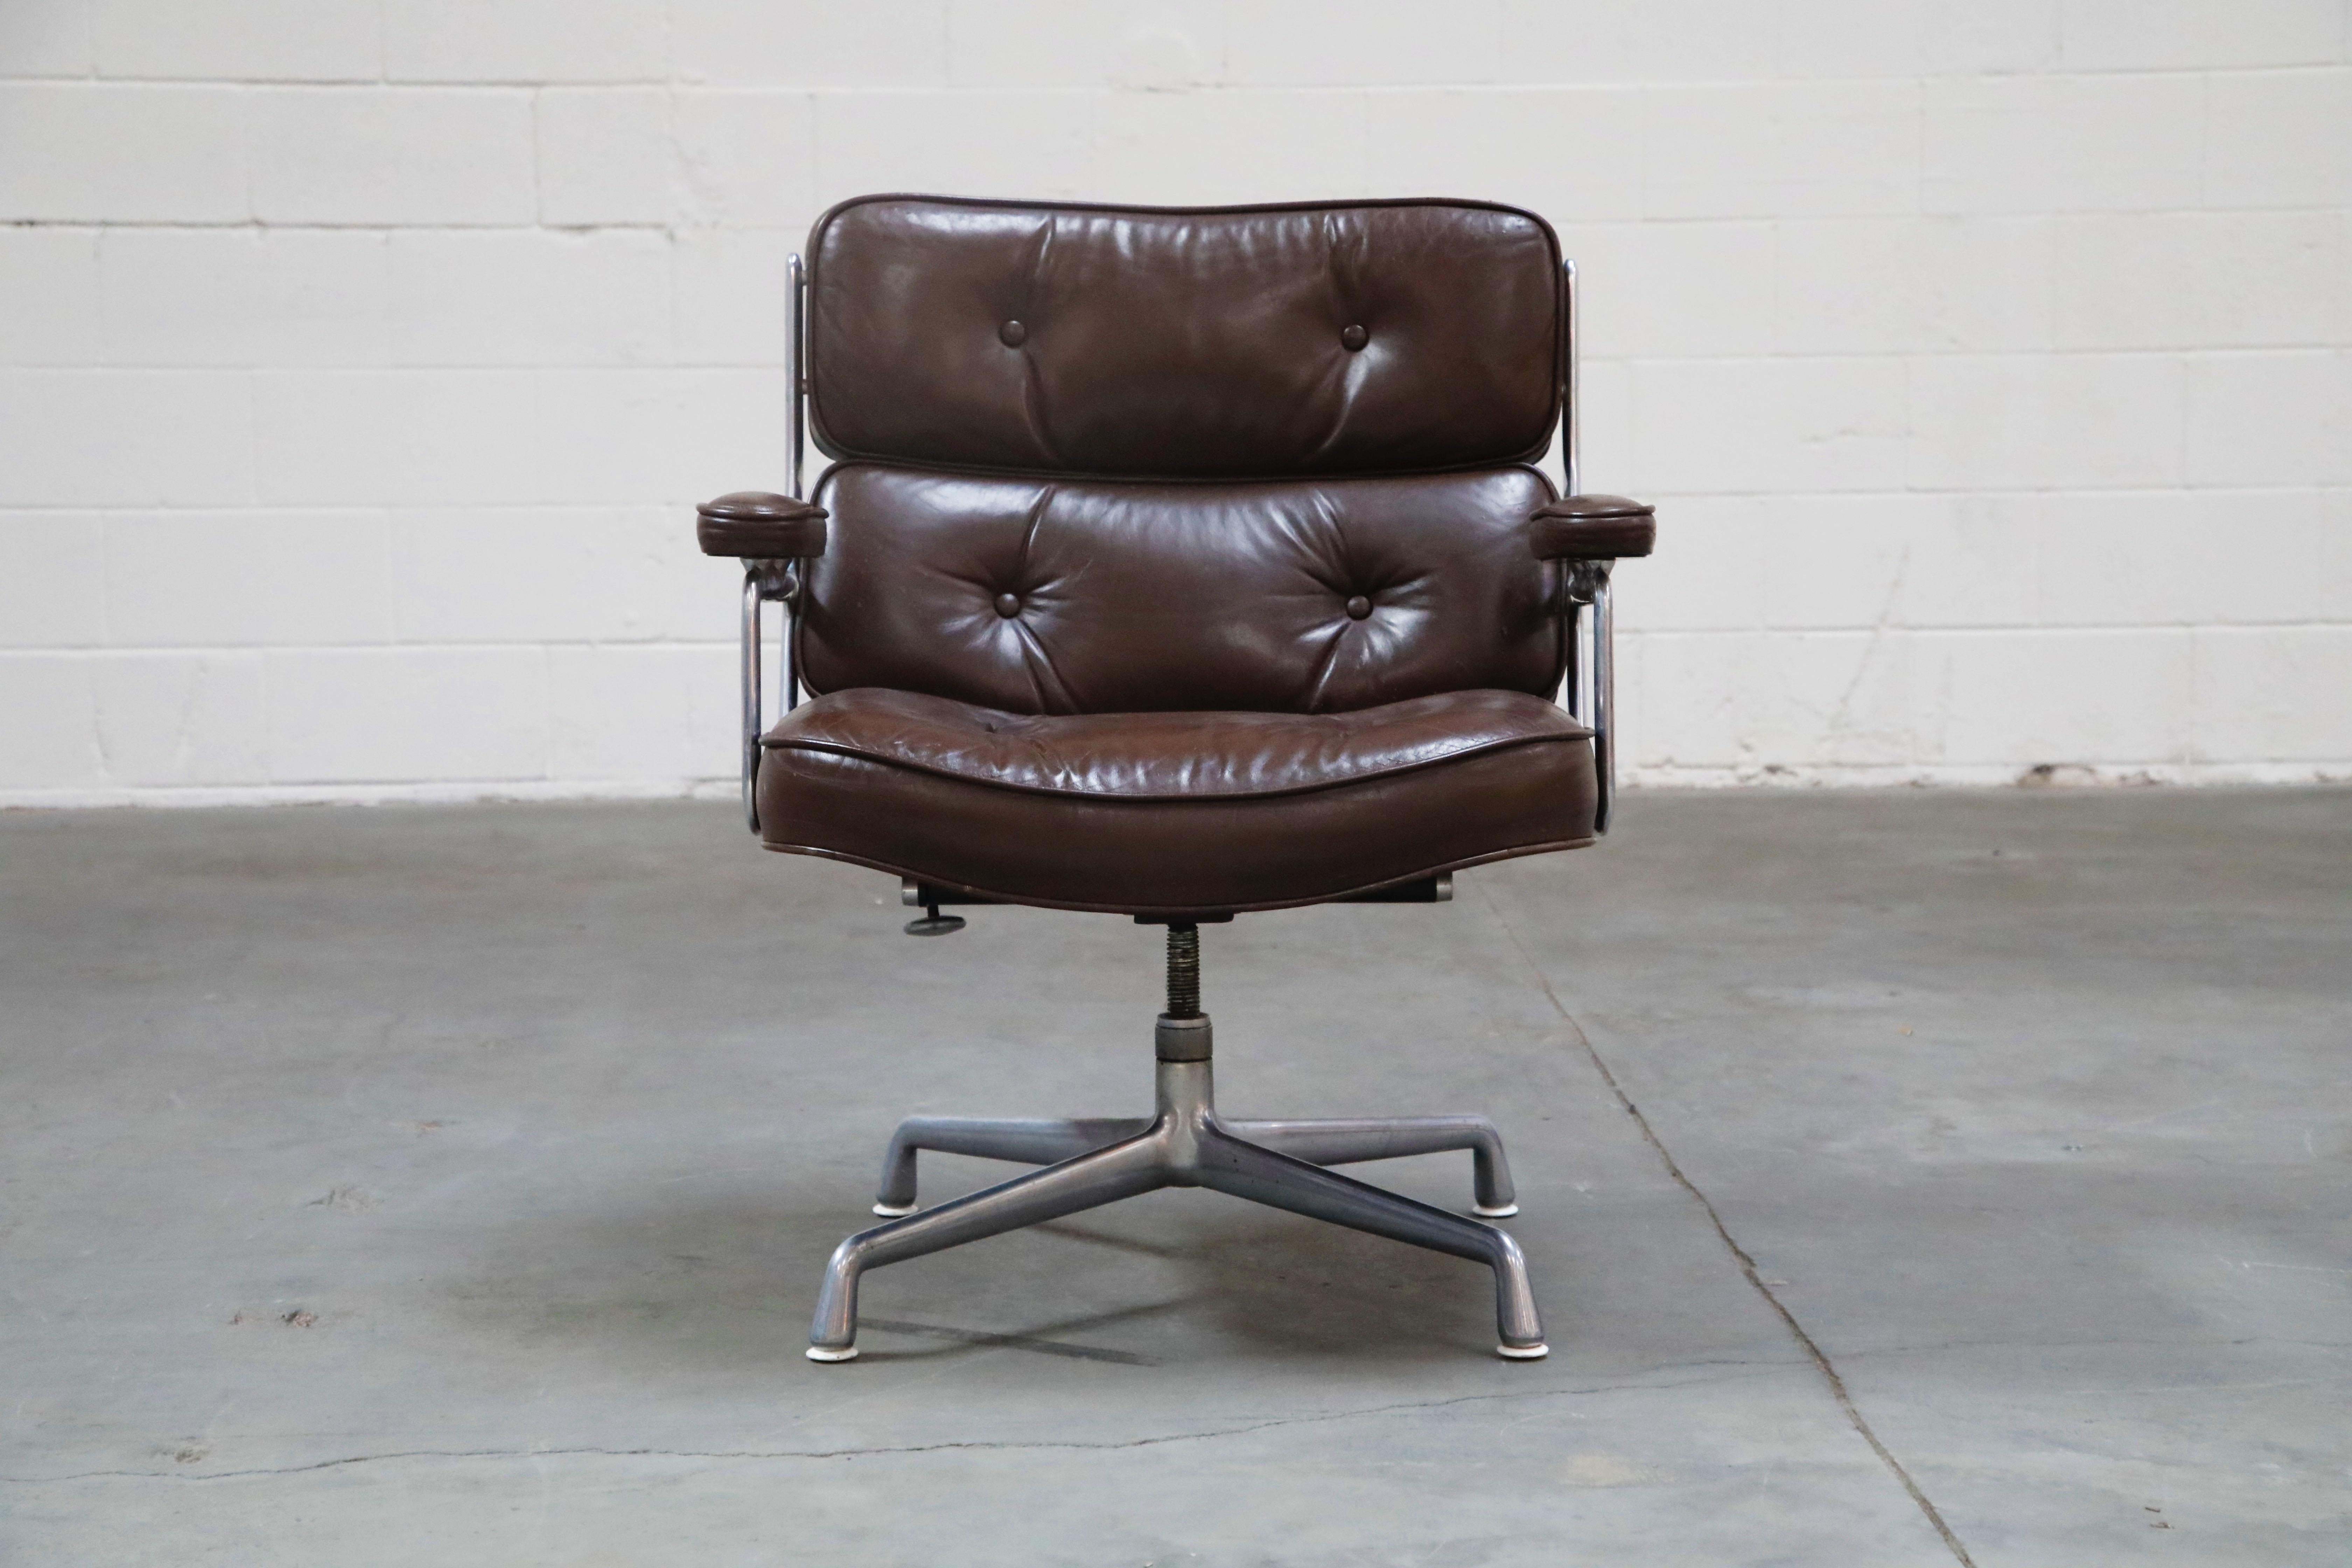 This wonderful pair of Time Life 'Lobby' lounge armchairs were designed by Charles Eames in 1959 and manufactured by Herman Miller, these examples produced in the 1970s. This handsome pair features its original deep chocolate brown colored leather